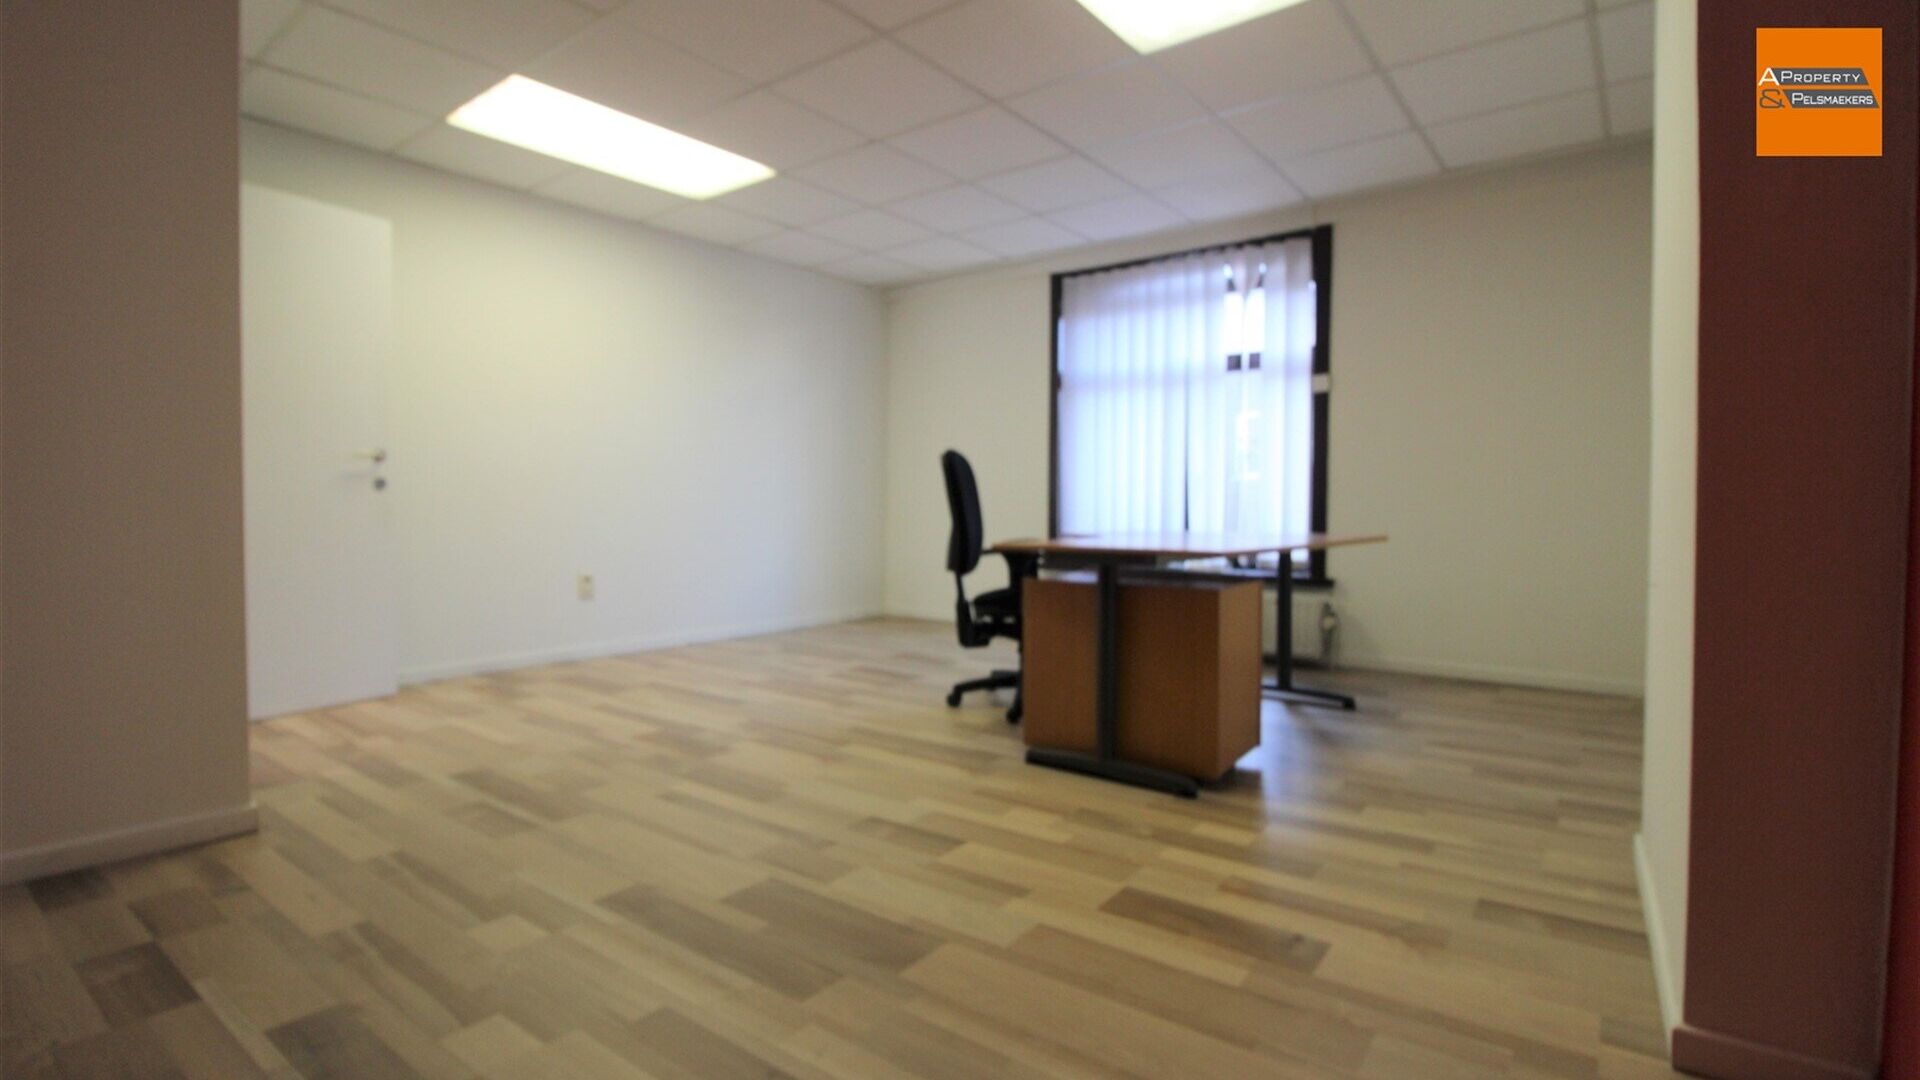 Offices for rent in Kessel-Lo